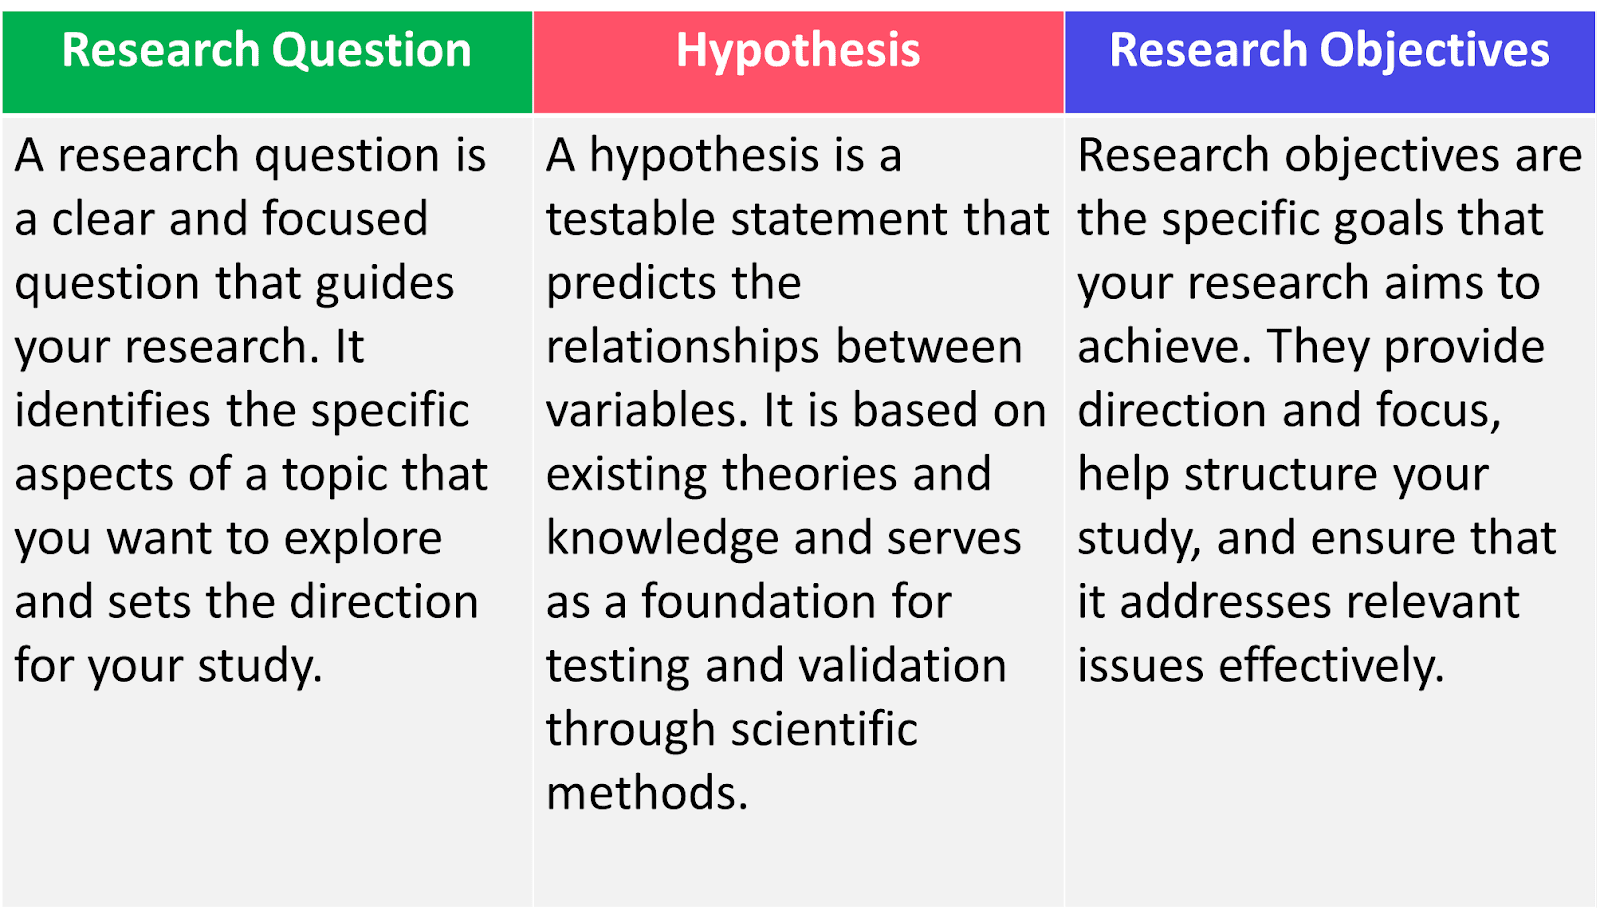 Understanding Research Questions and Hypotheses